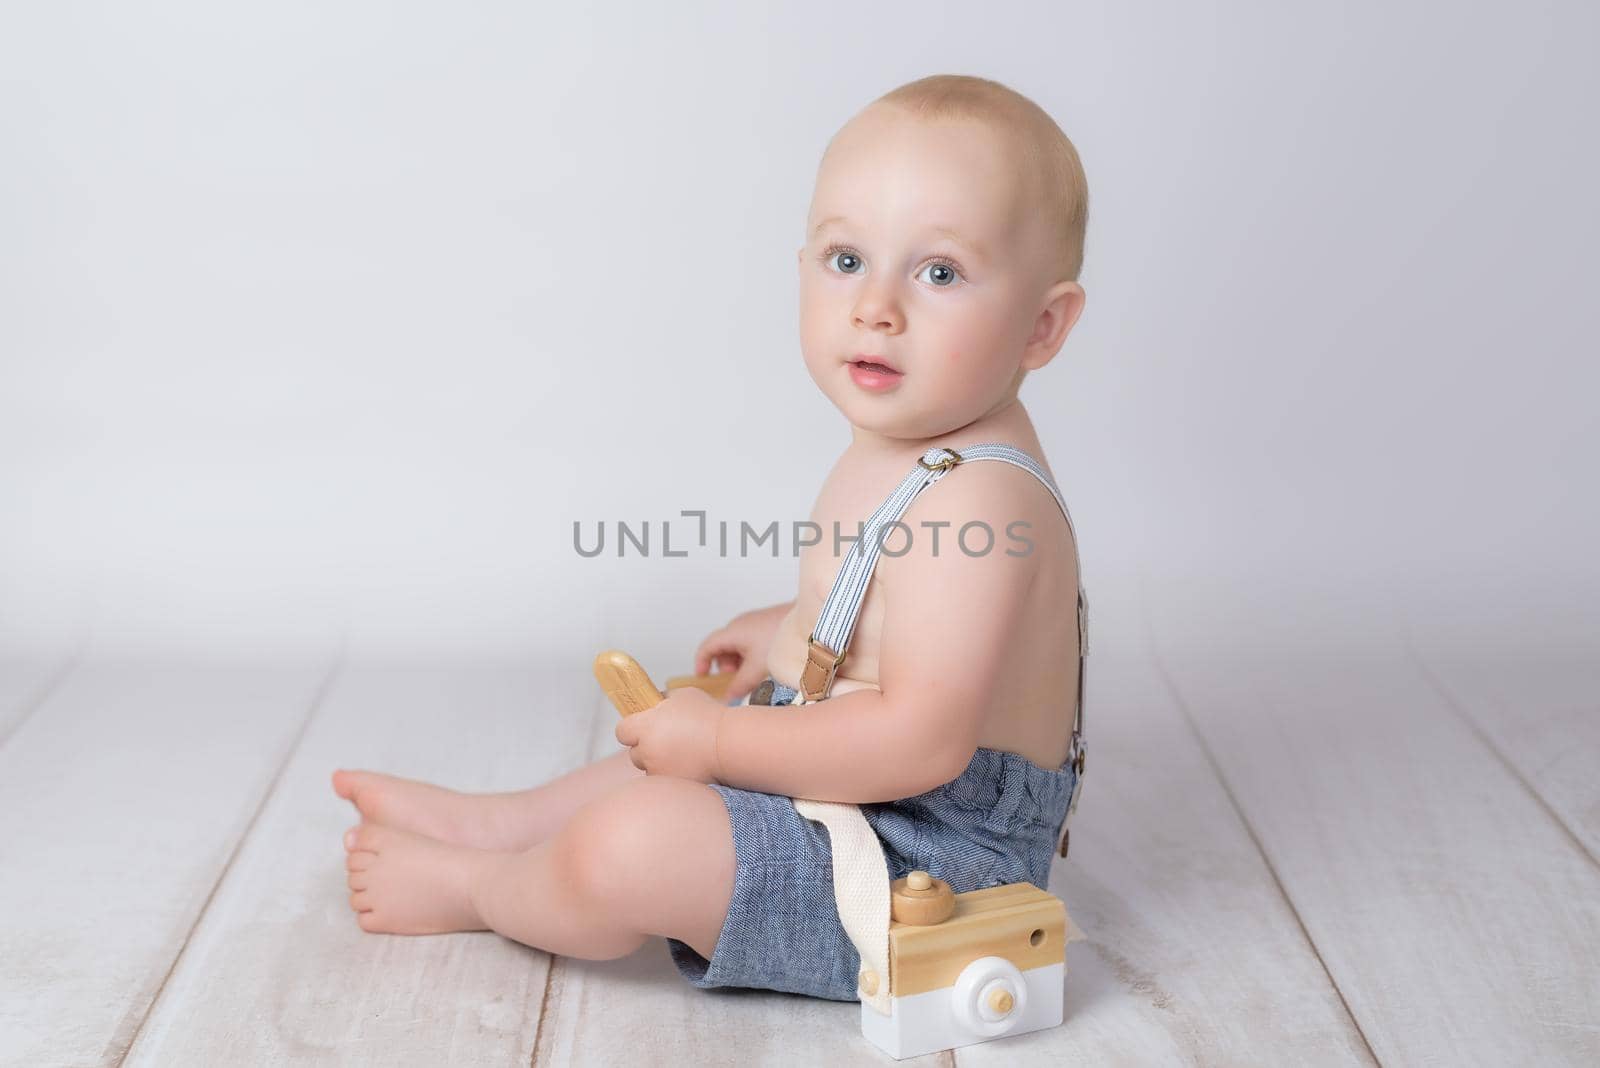 little boy with old photographic camera on white background.